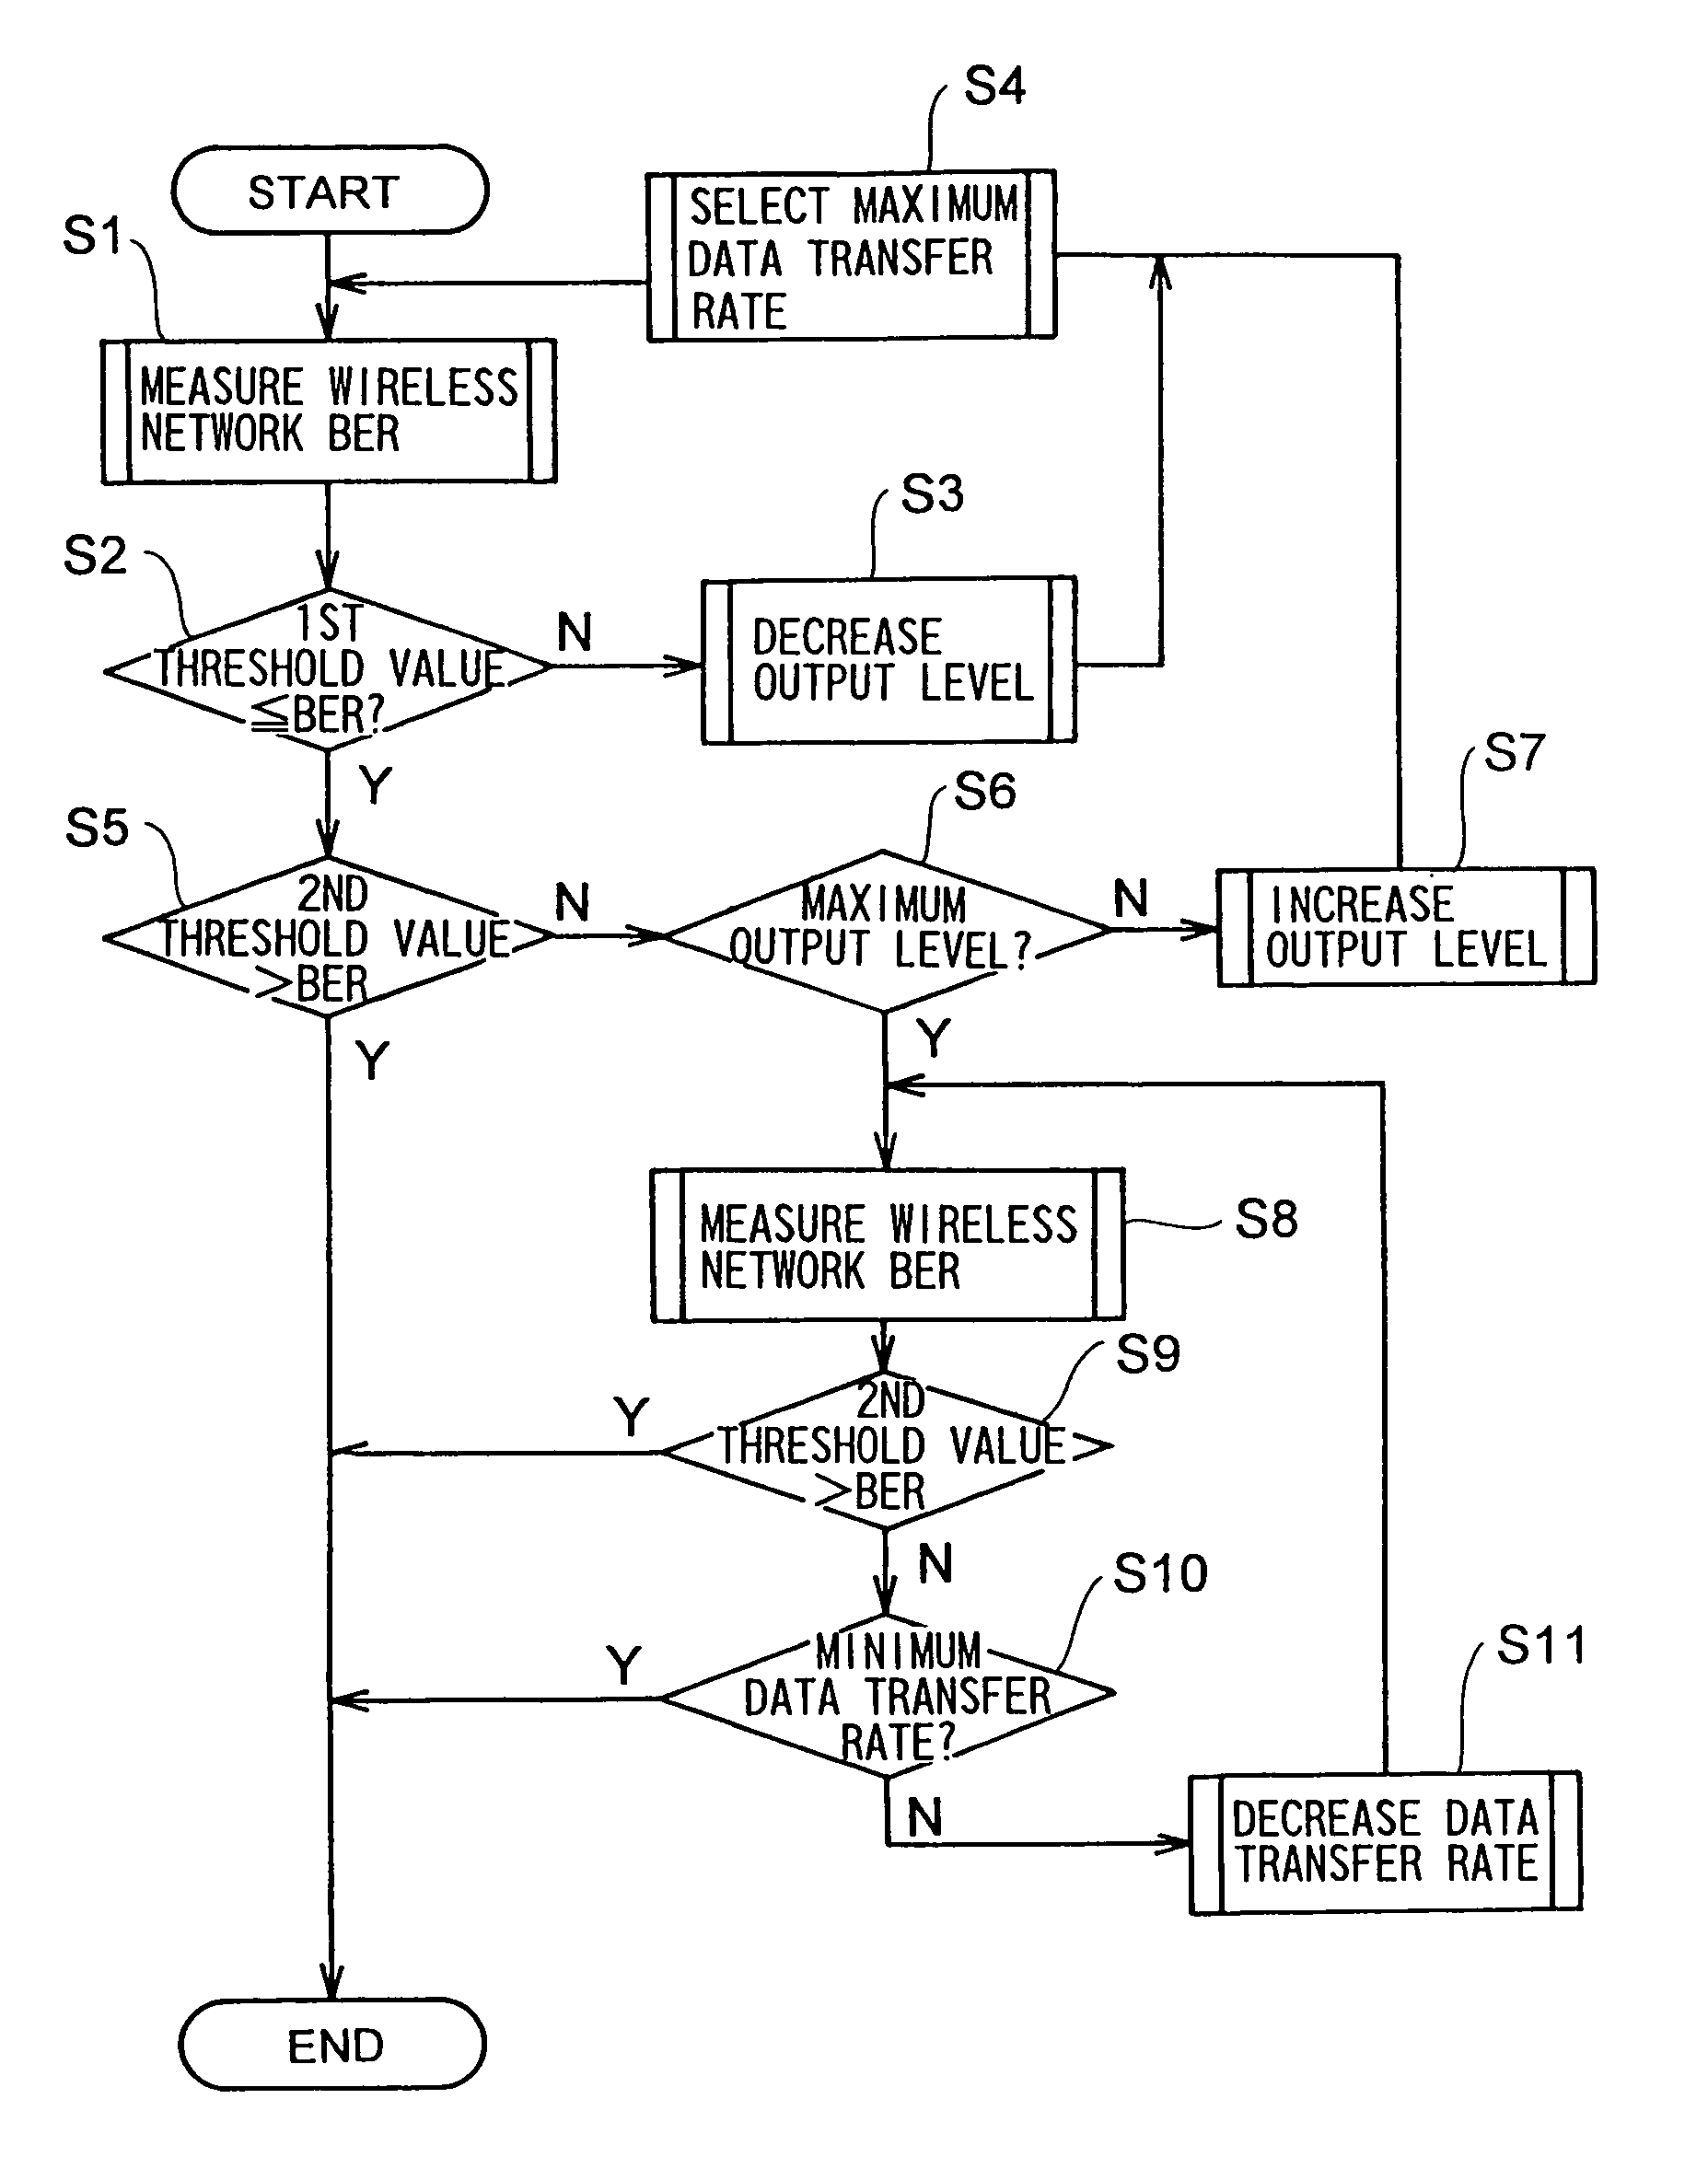 Cable modem having a wireless communication function